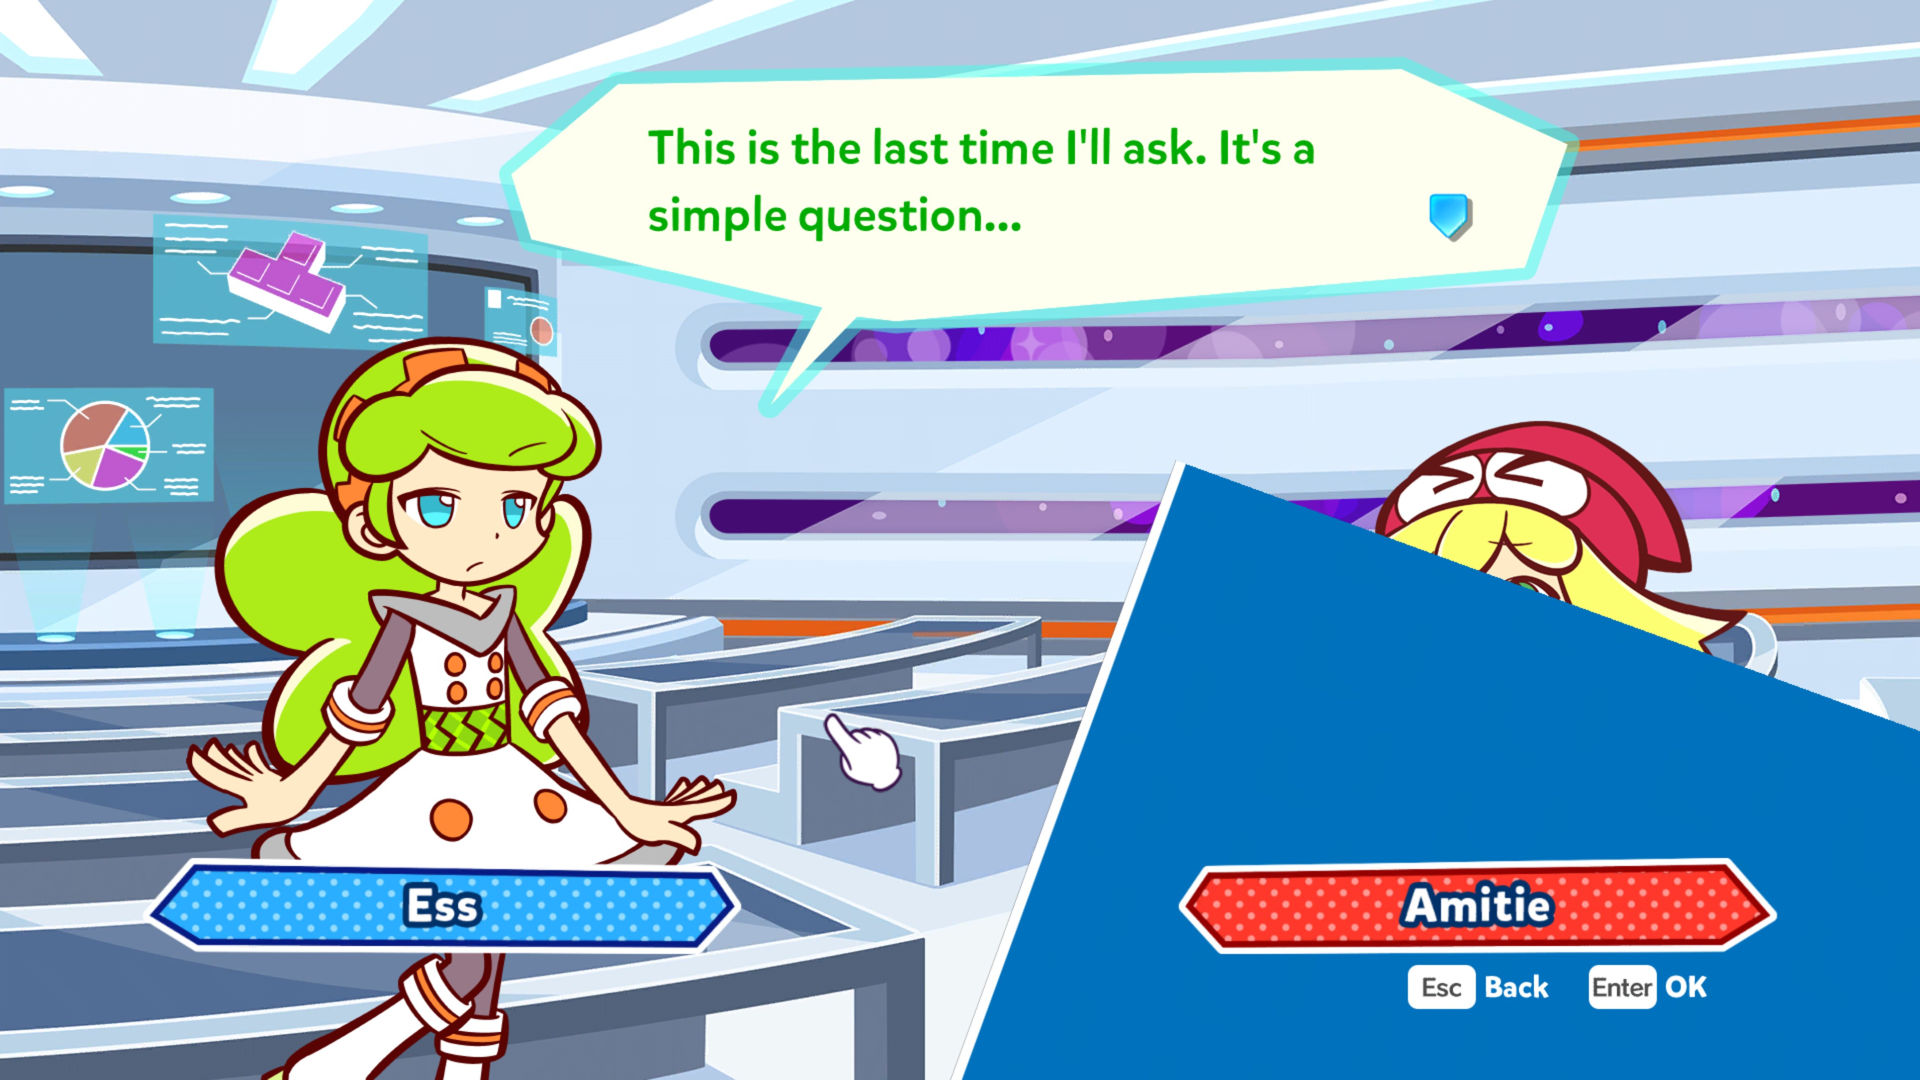 A rogue piece of interface obscures Amitie during a cutscene